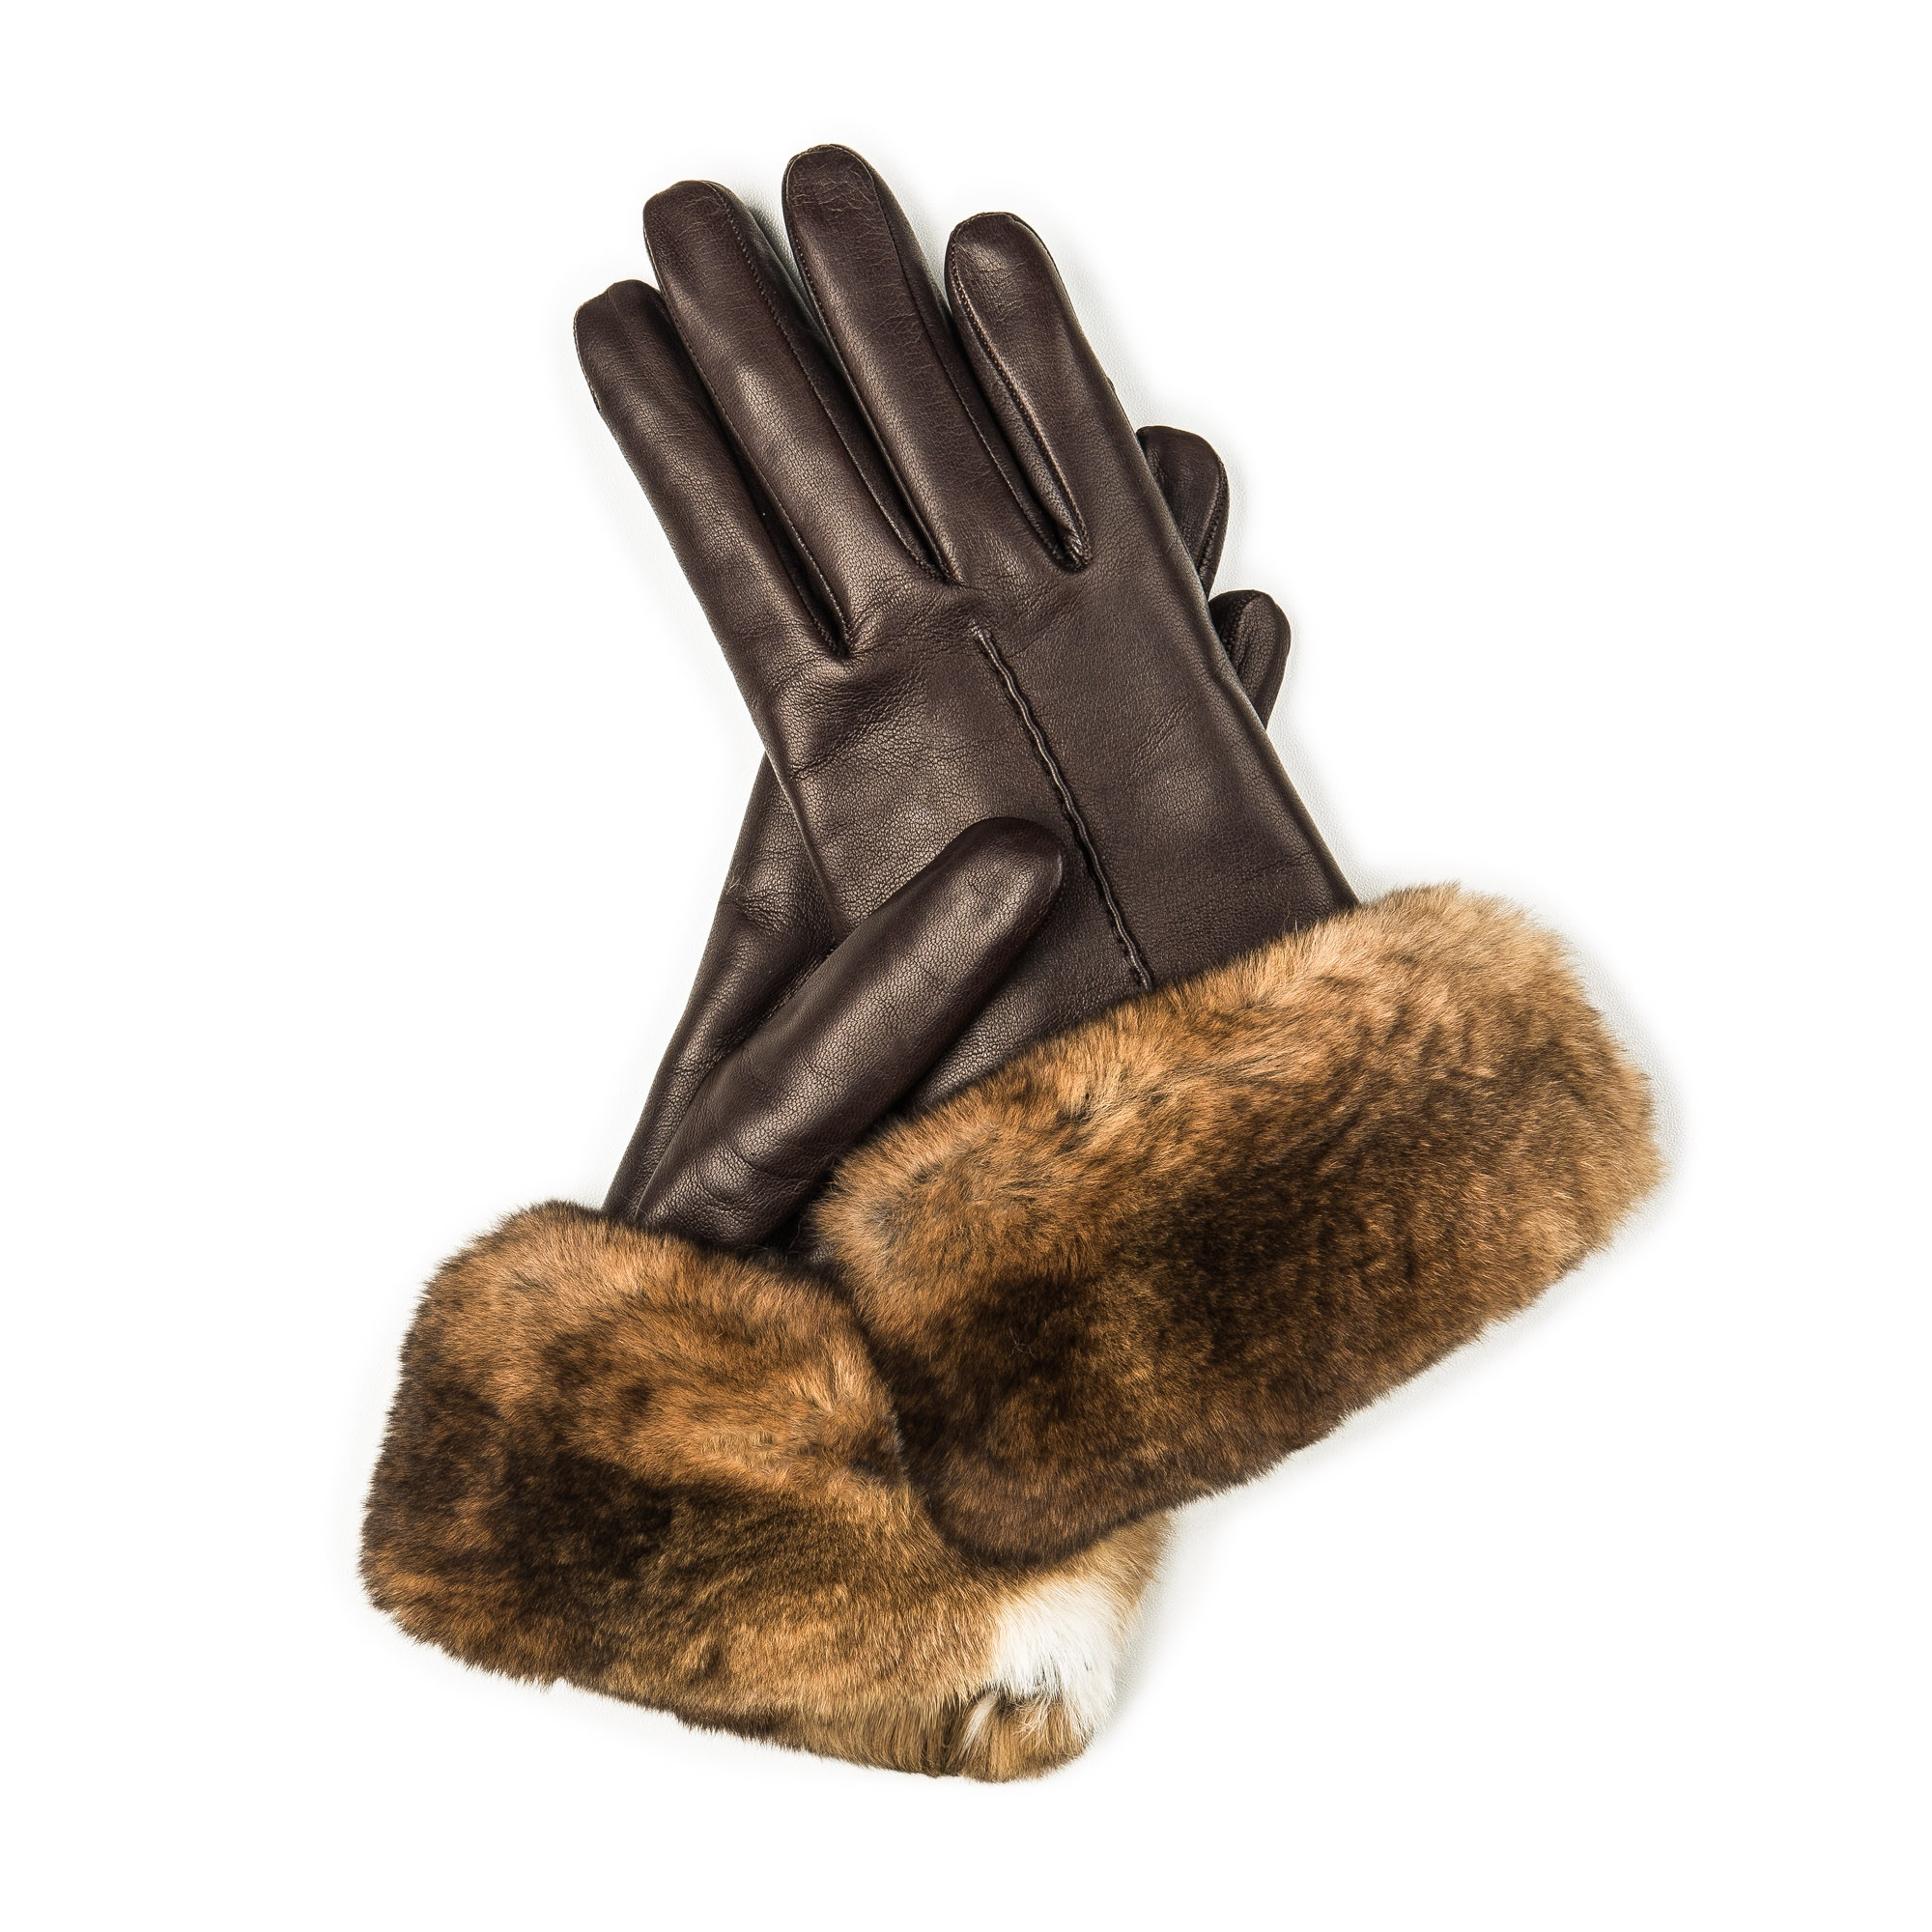 Nappa Leather Rabbit Fur Trimmed Gloves - The Ben Silver Collection